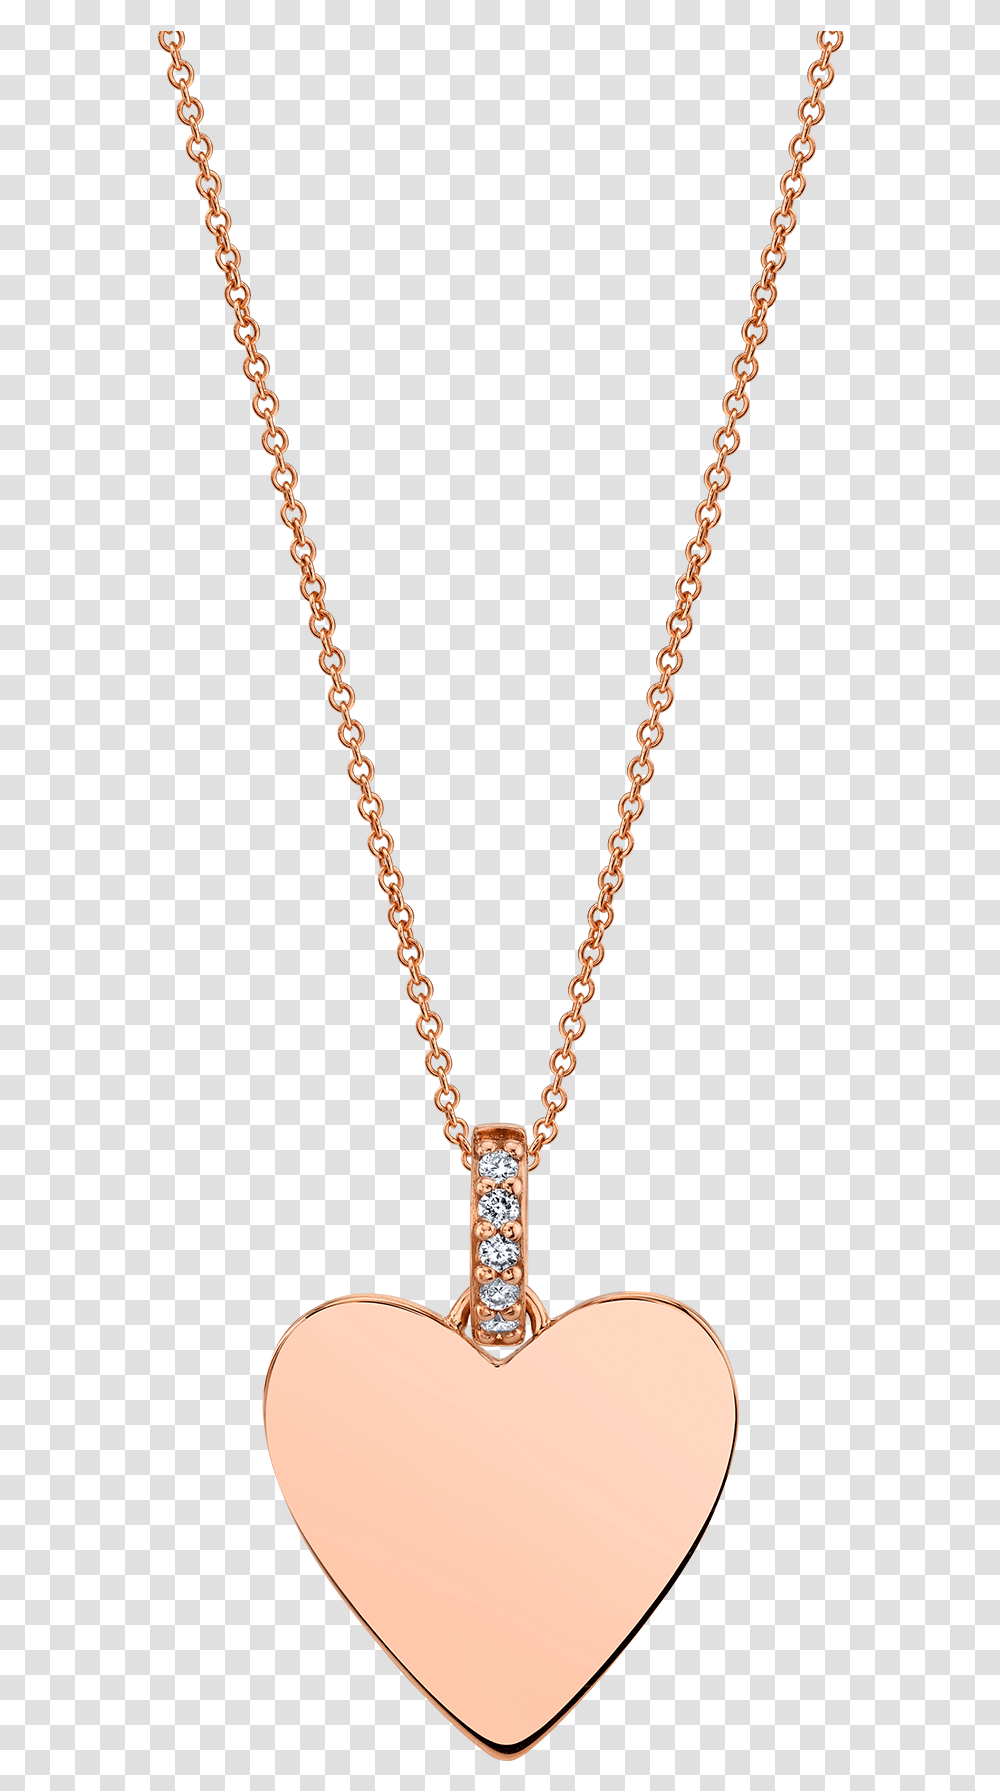 Heart Pendant With Diamond Bale Locket, Necklace, Jewelry, Accessories, Accessory Transparent Png